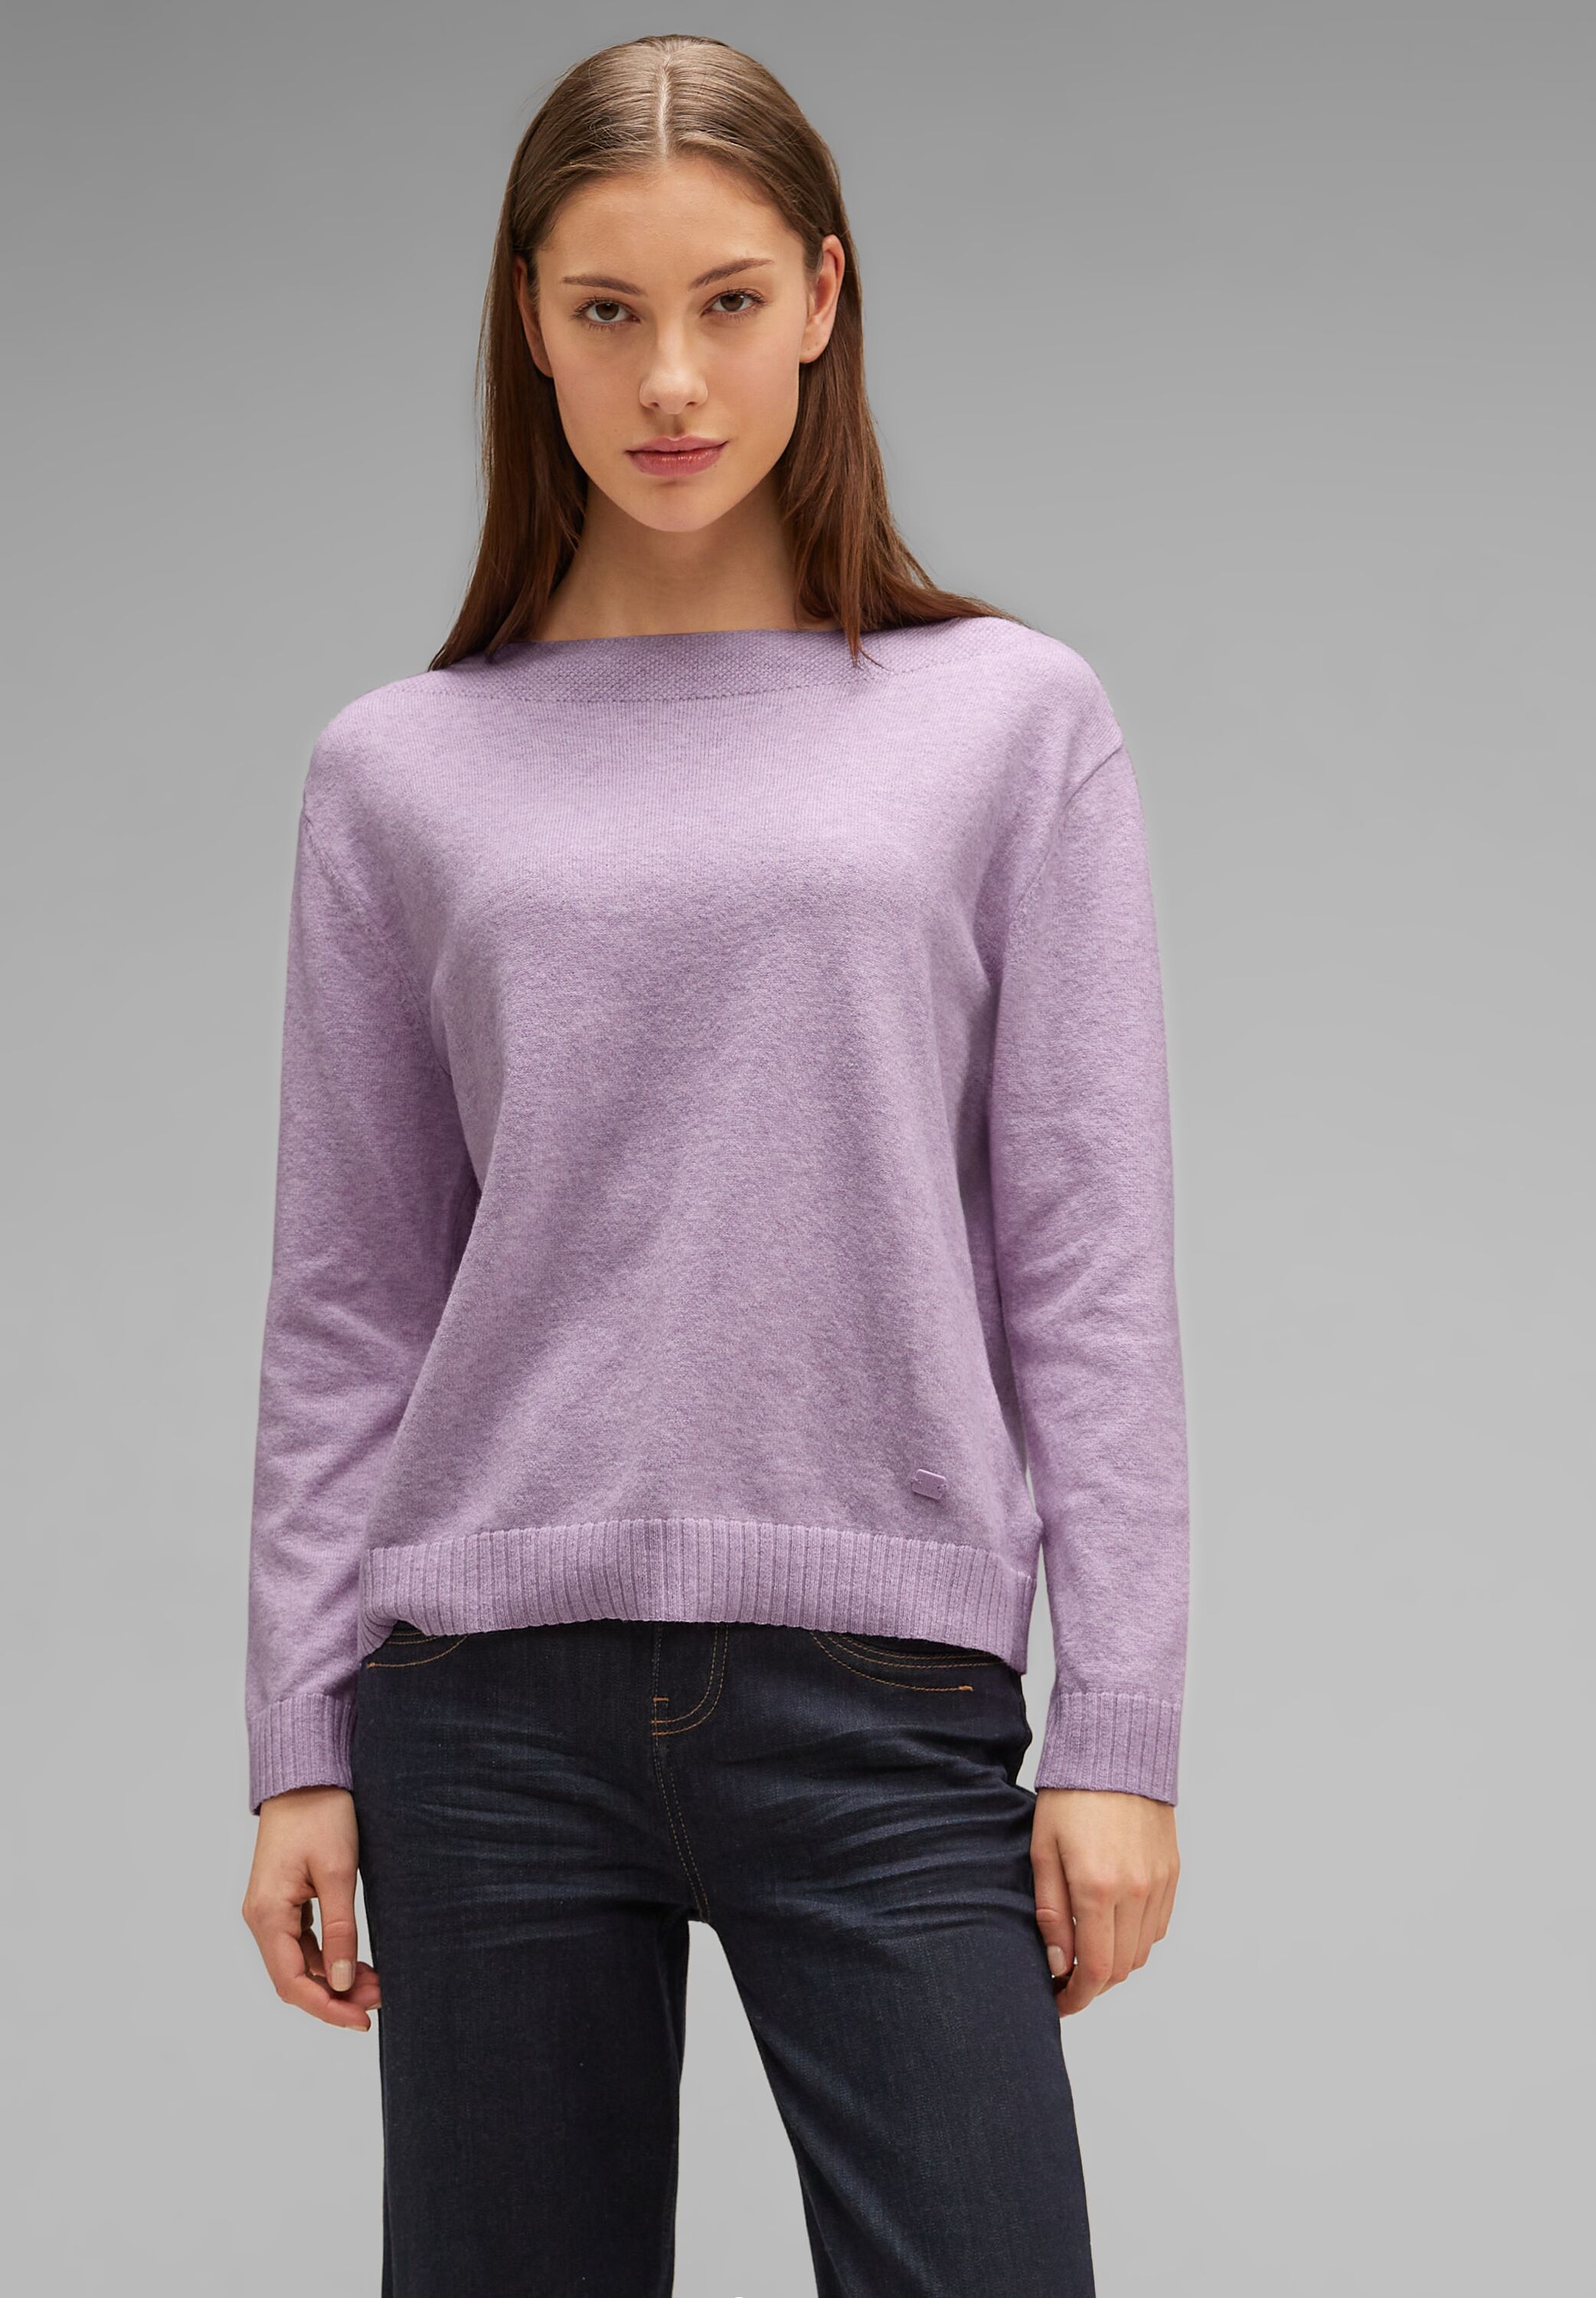 Street One Pullover in Soft Pure Lilac Melange im SALE reduziert  A302414-15290 - CONCEPT Mode